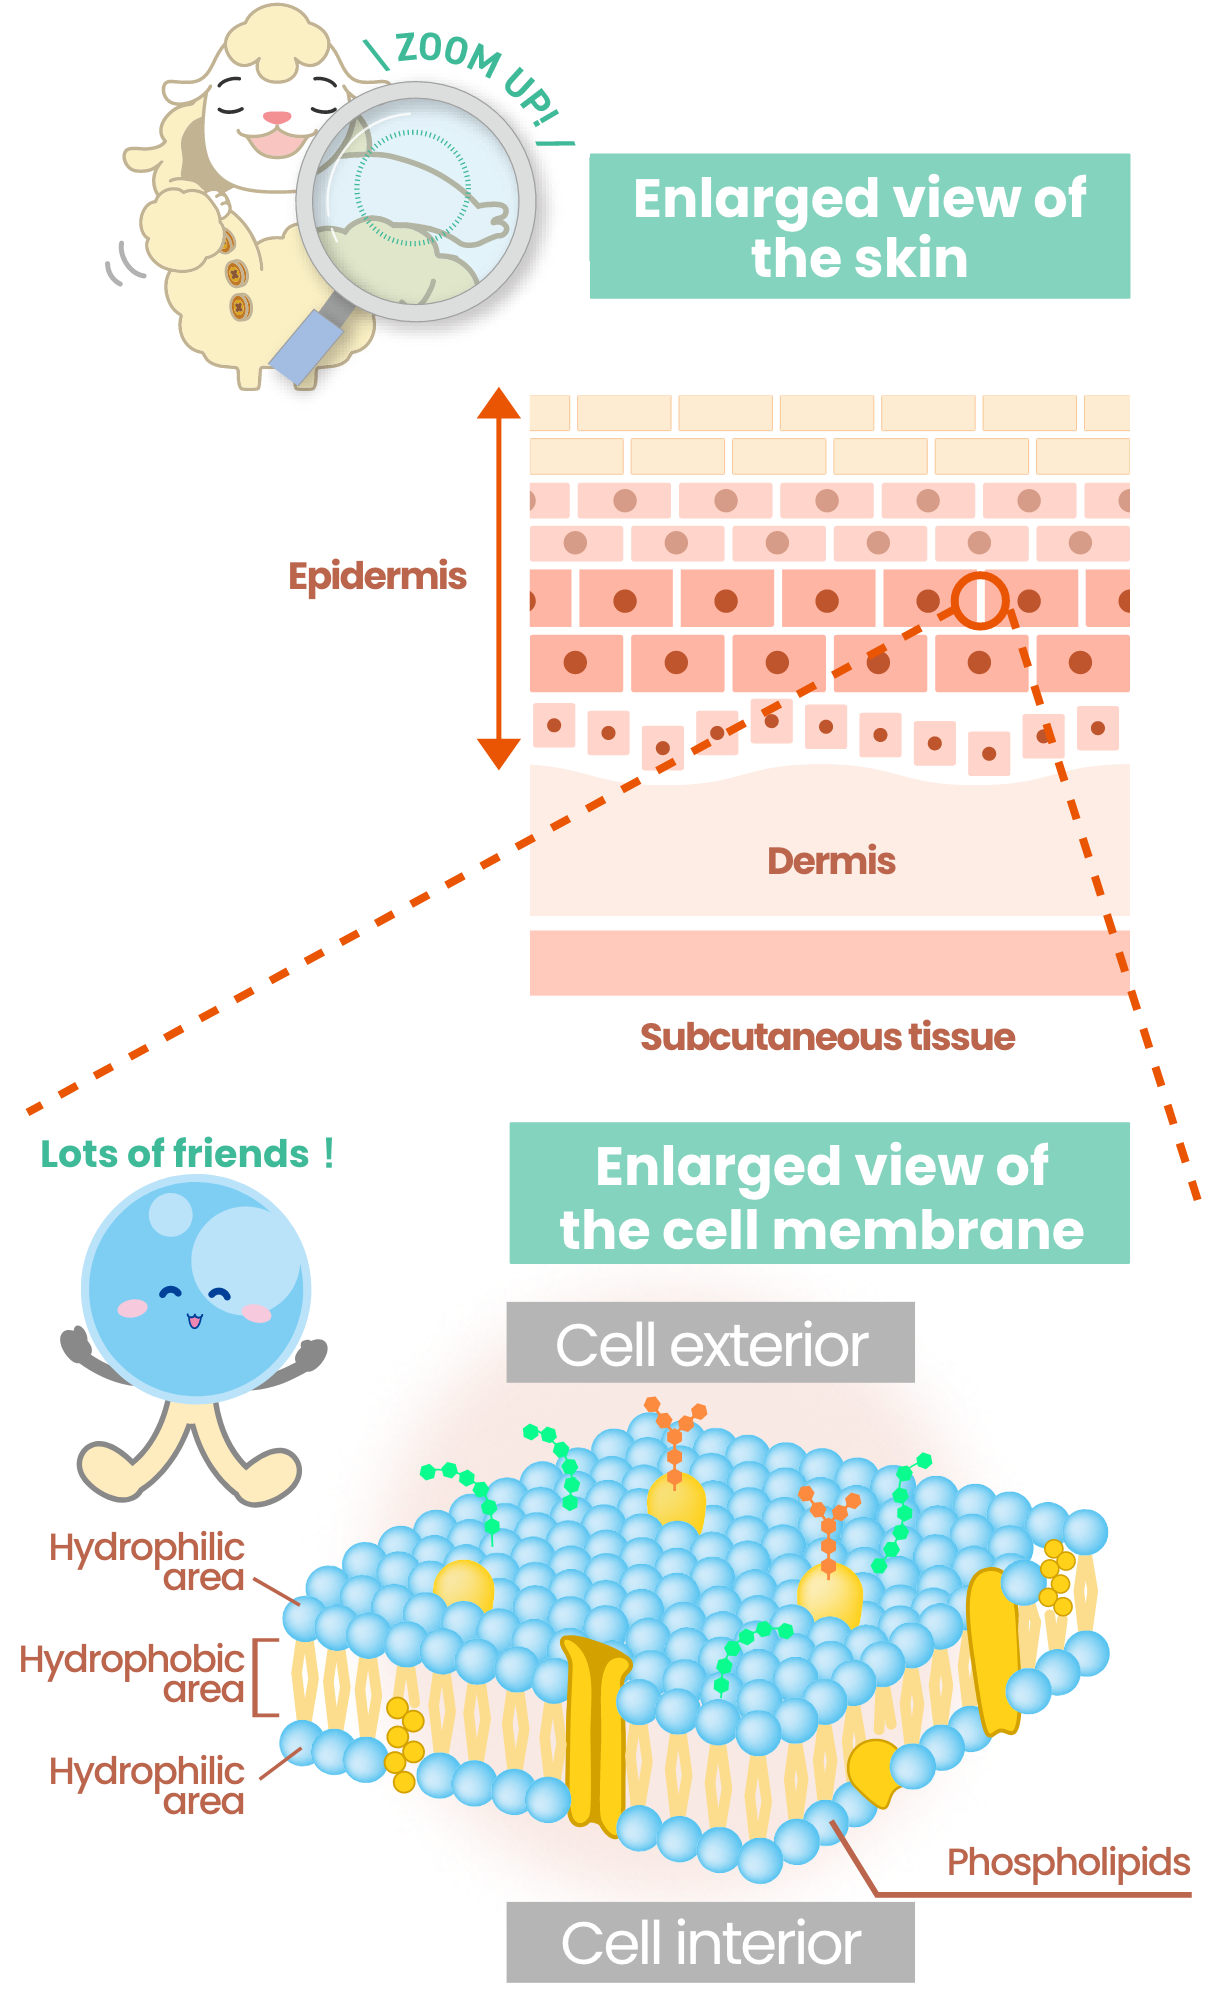 Enlarged view of the skin and Enlarged view of the cell membrane